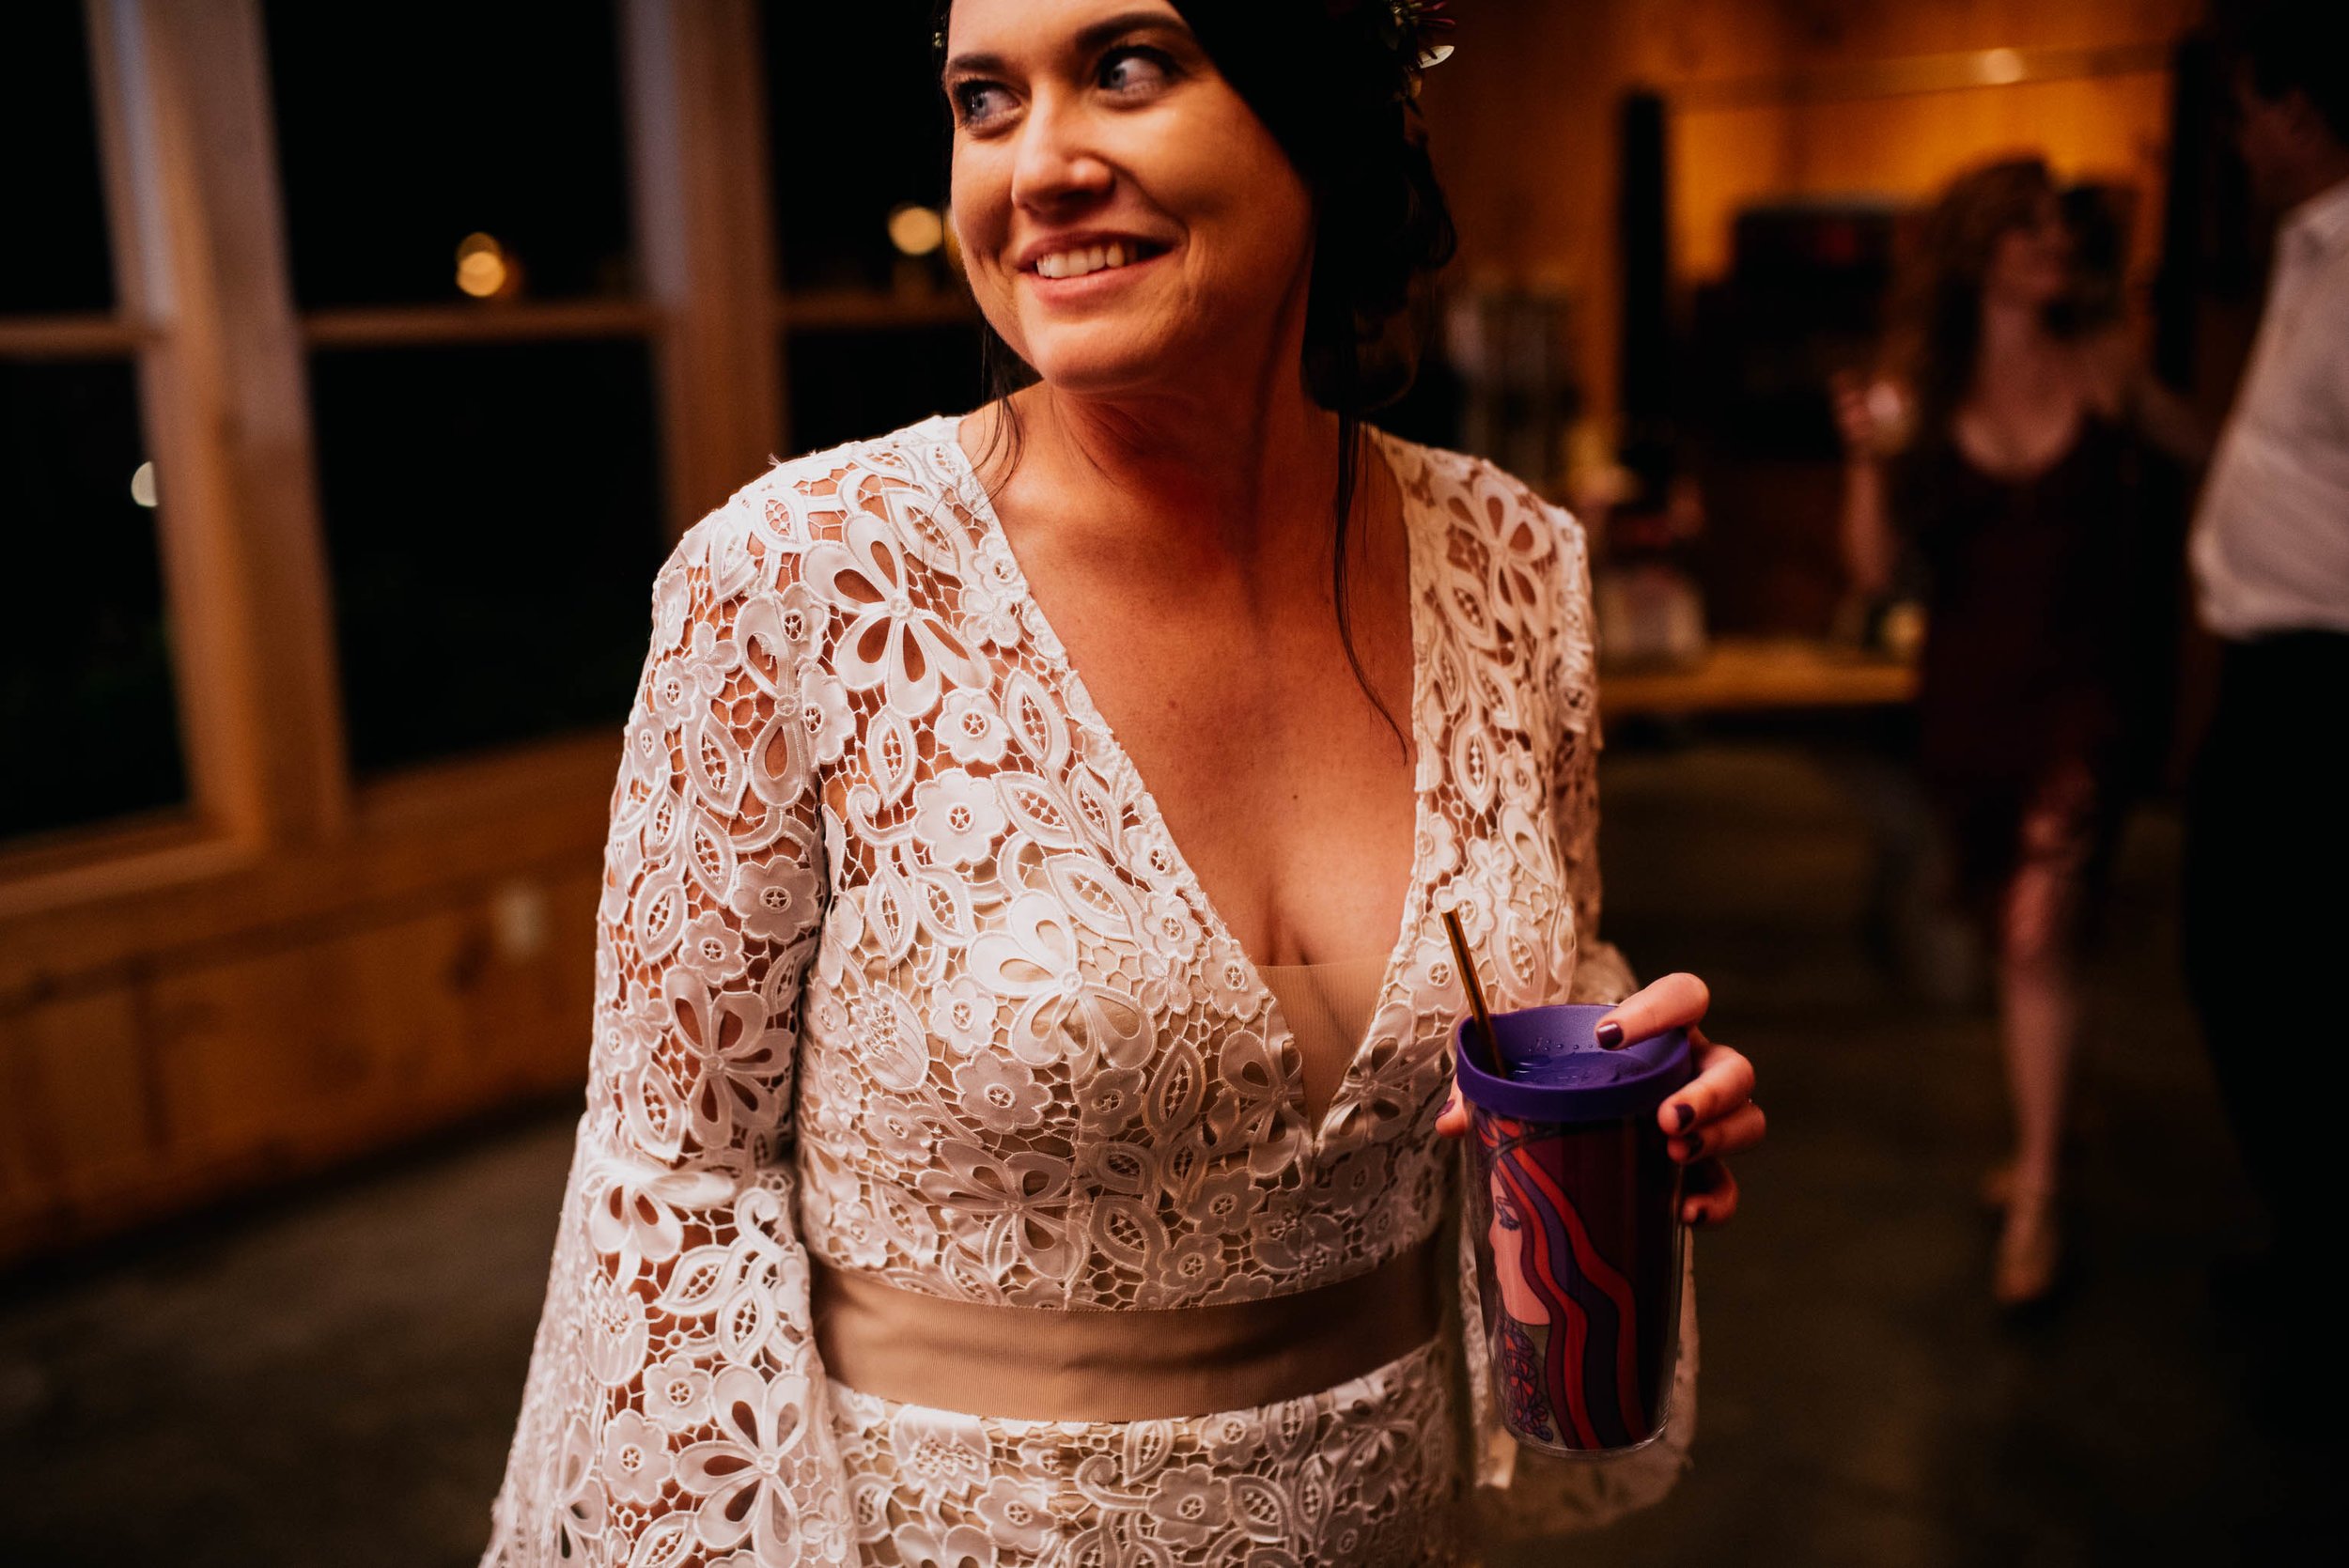 bride smiling during the reception while on the dancefloor